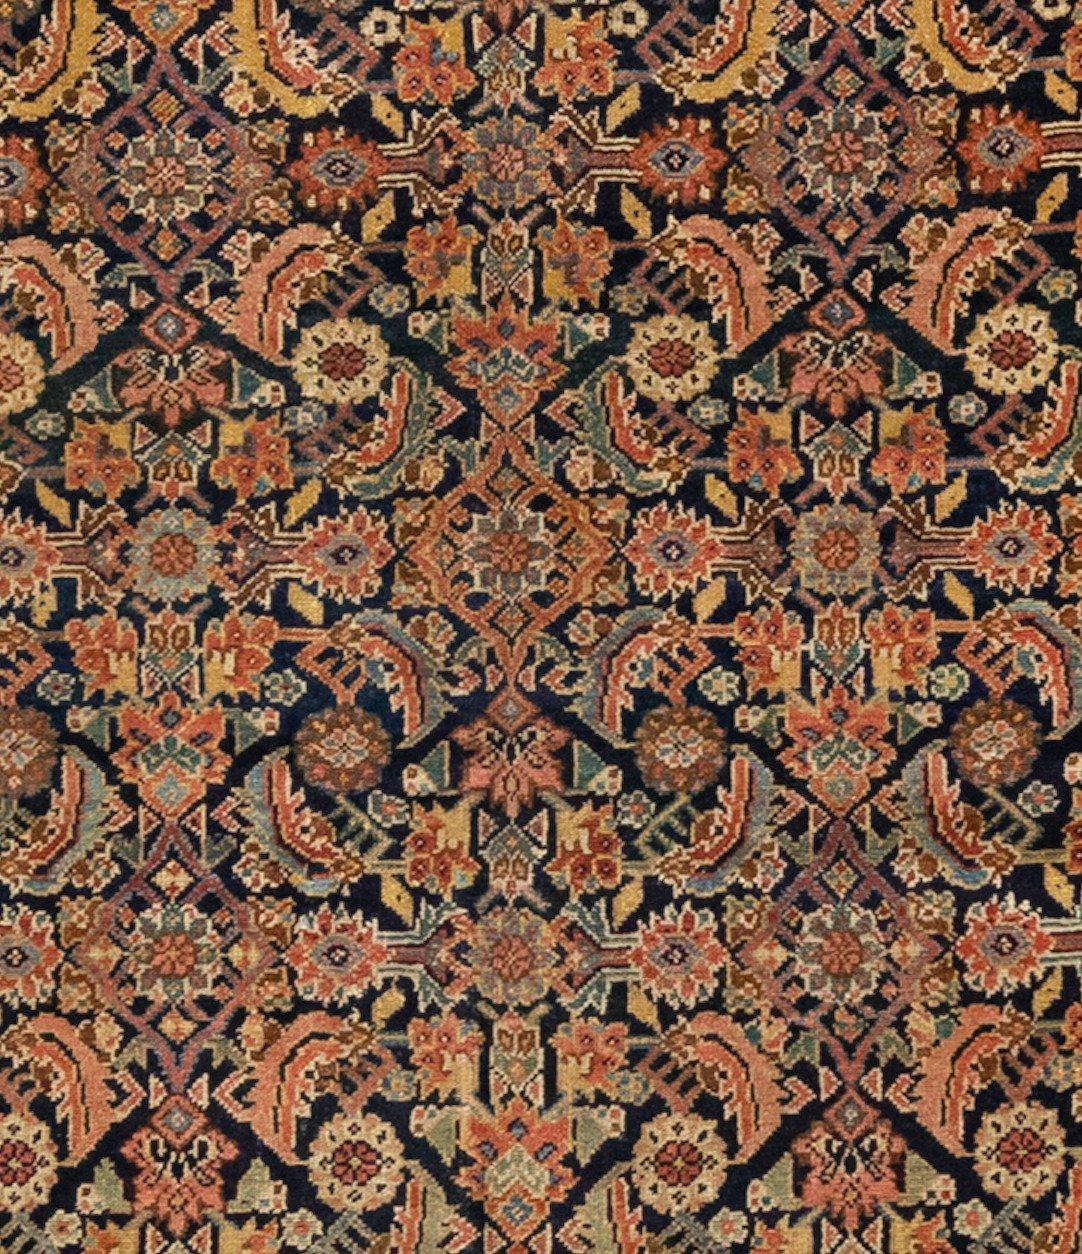 Hand-Knotted Antique Rust Ivory Navy Blue Geometric Malayer Persian Rug, circa 1880-1900s For Sale